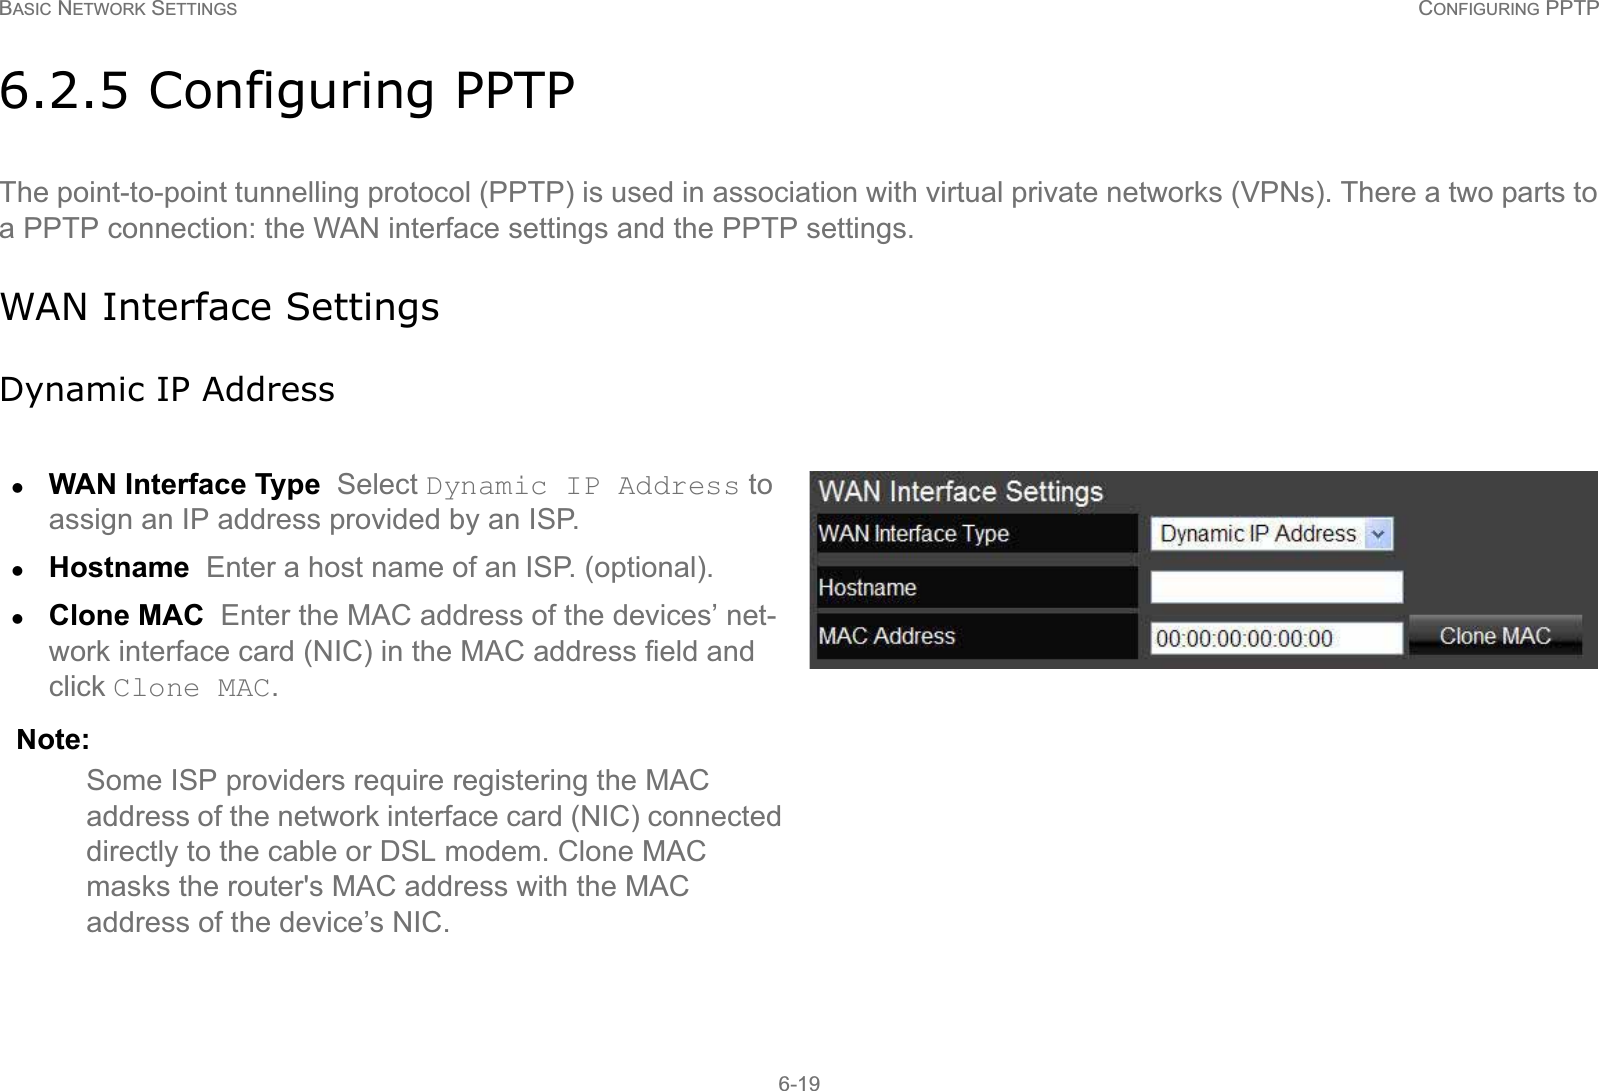 BASIC NETWORK SETTINGS CONFIGURING PPTP6-196.2.5 Configuring PPTPThe point-to-point tunnelling protocol (PPTP) is used in association with virtual private networks (VPNs). There a two parts to a PPTP connection: the WAN interface settings and the PPTP settings.WAN Interface SettingsDynamic IP AddresszWAN Interface Type  Select Dynamic IP Address to assign an IP address provided by an ISP.zHostname  Enter a host name of an ISP. (optional).zClone MAC  Enter the MAC address of the devices’ net-work interface card (NIC) in the MAC address field and click Clone MAC. Note:Some ISP providers require registering the MAC address of the network interface card (NIC) connected directly to the cable or DSL modem. Clone MAC masks the router&apos;s MAC address with the MAC address of the device’s NIC.